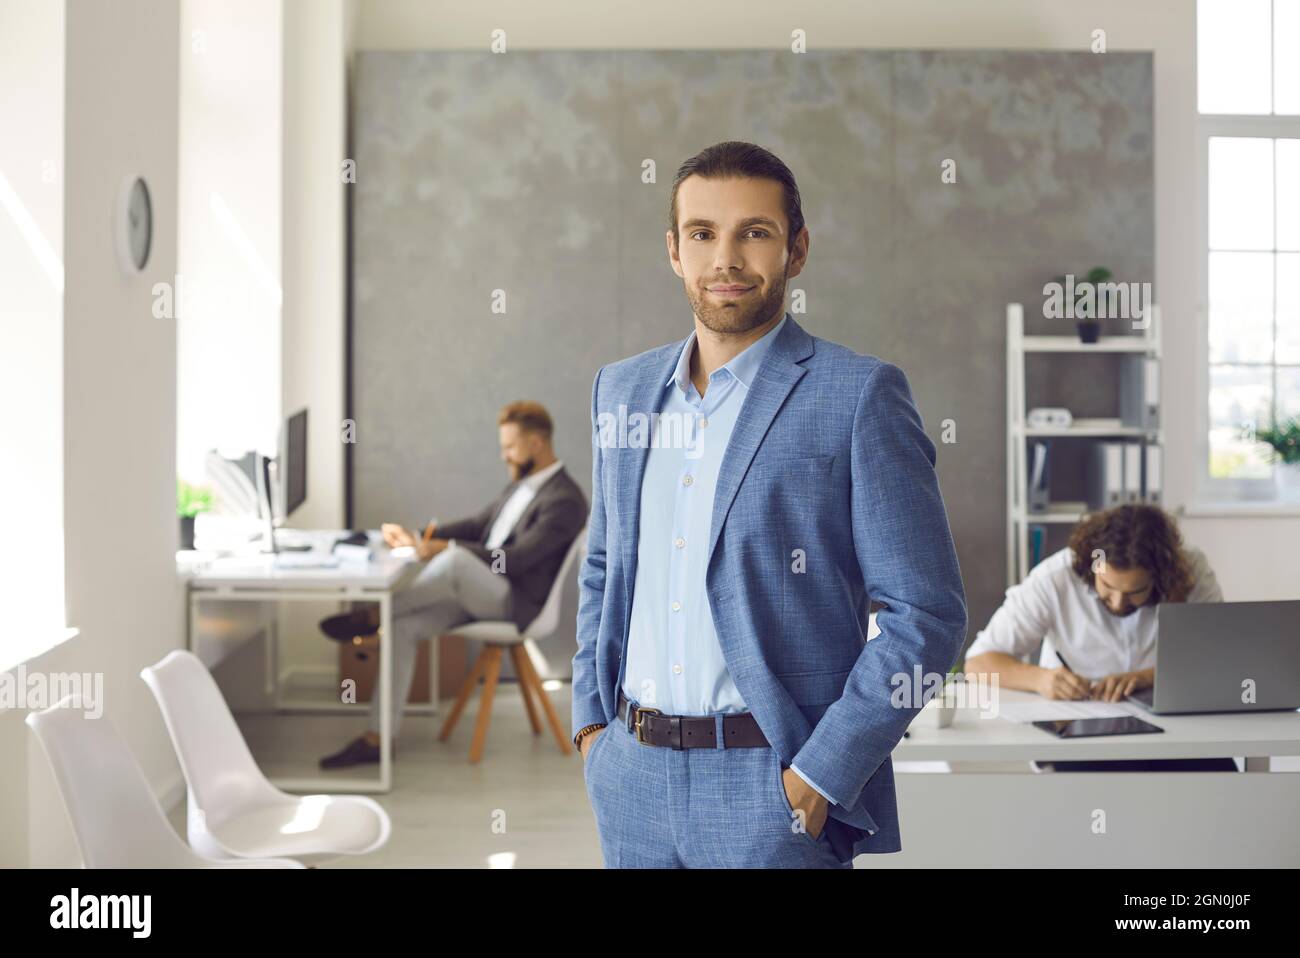 Portrait of successful businessman in suit in office Stock Photo